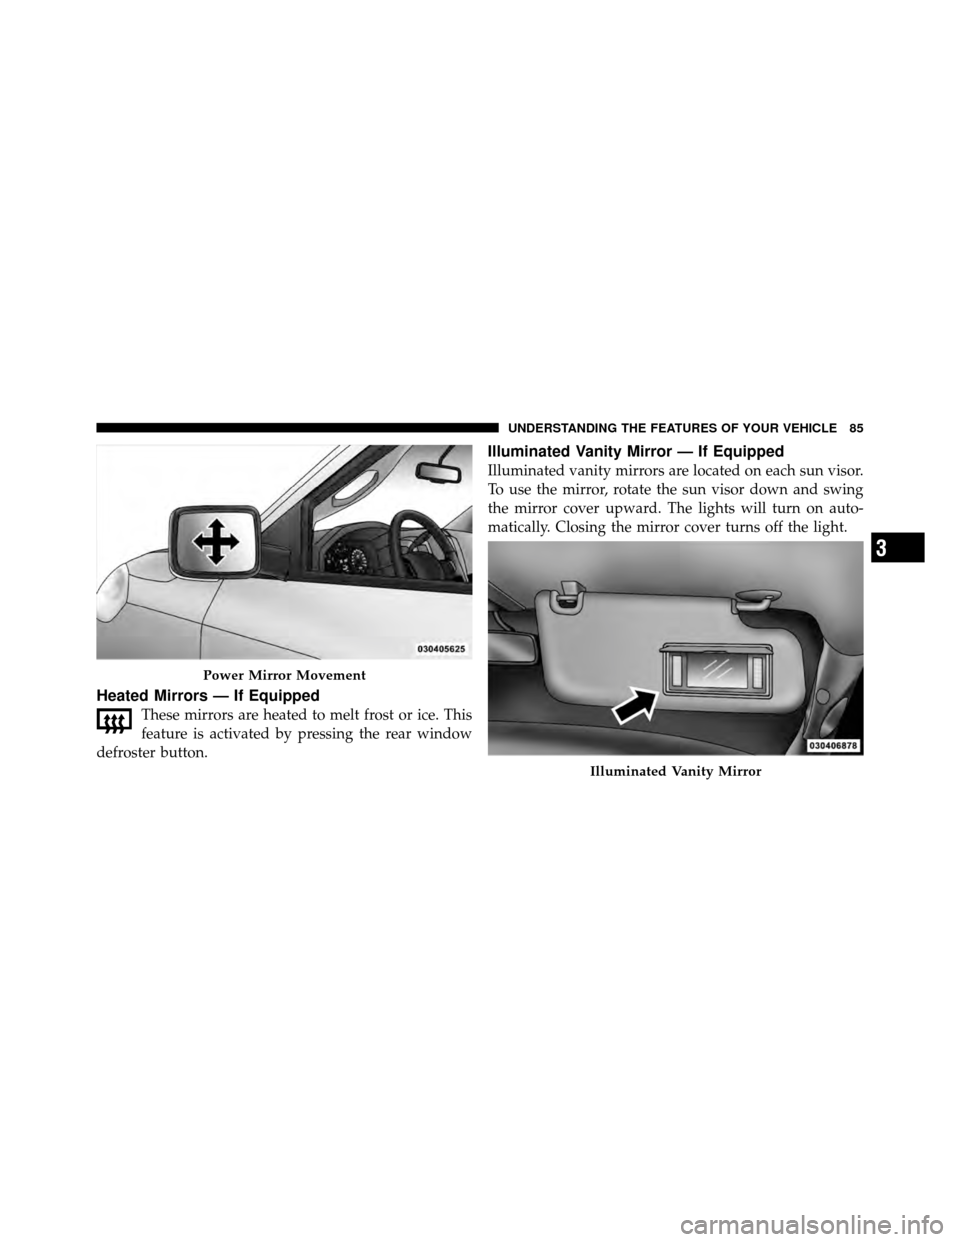 Ram 5500 Chassis Cab 2011 Manual Online Heated Mirrors — If Equipped
These mirrors are heated to melt frost or ice. This
feature is activated by pressing the rear window
defroster button.
Illuminated Vanity Mirror — If Equipped
Illumina